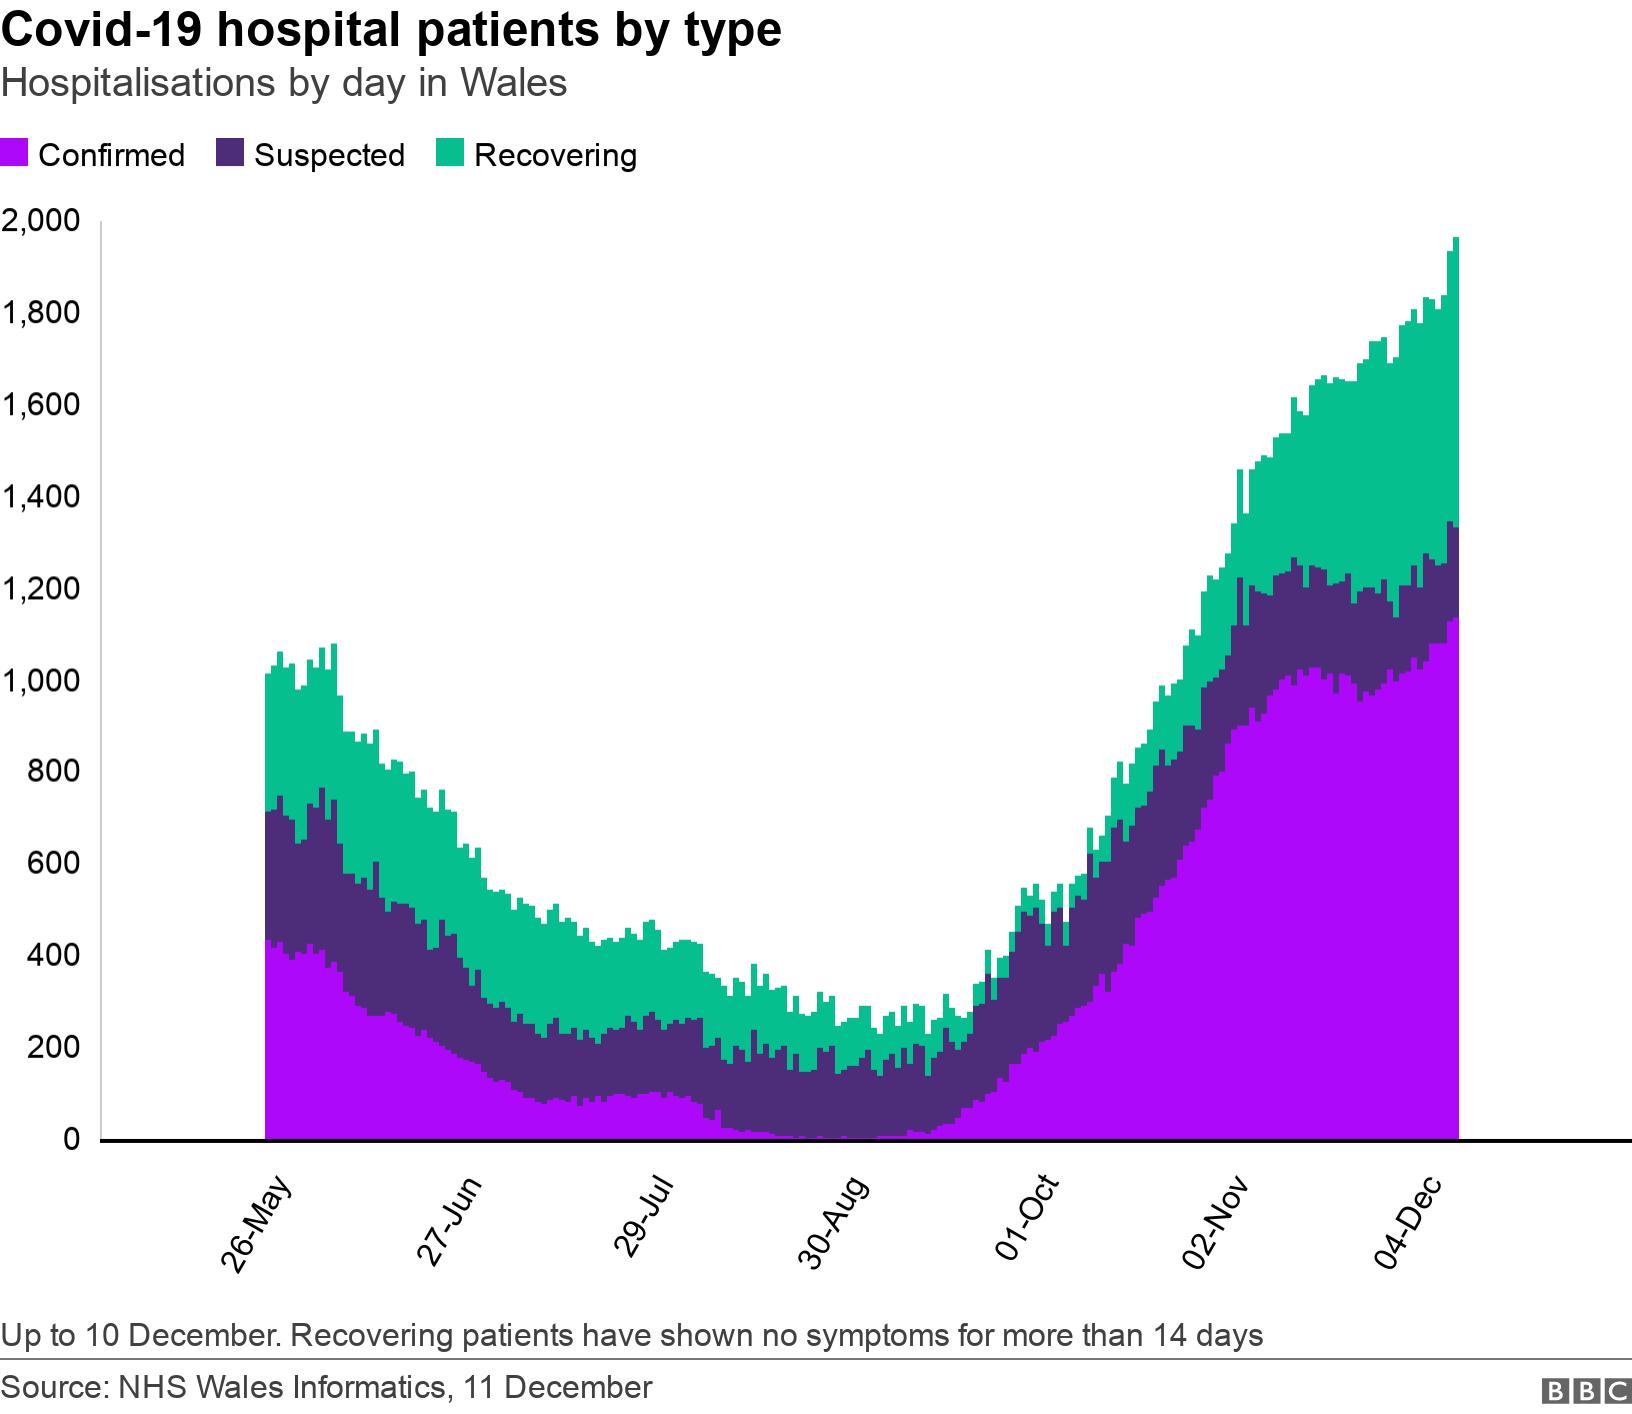 Covid-19 hospital patients by type. Hospitalisations by day in Wales. Up to 10 December. Recovering patients have shown no symptoms for more than 14 days.